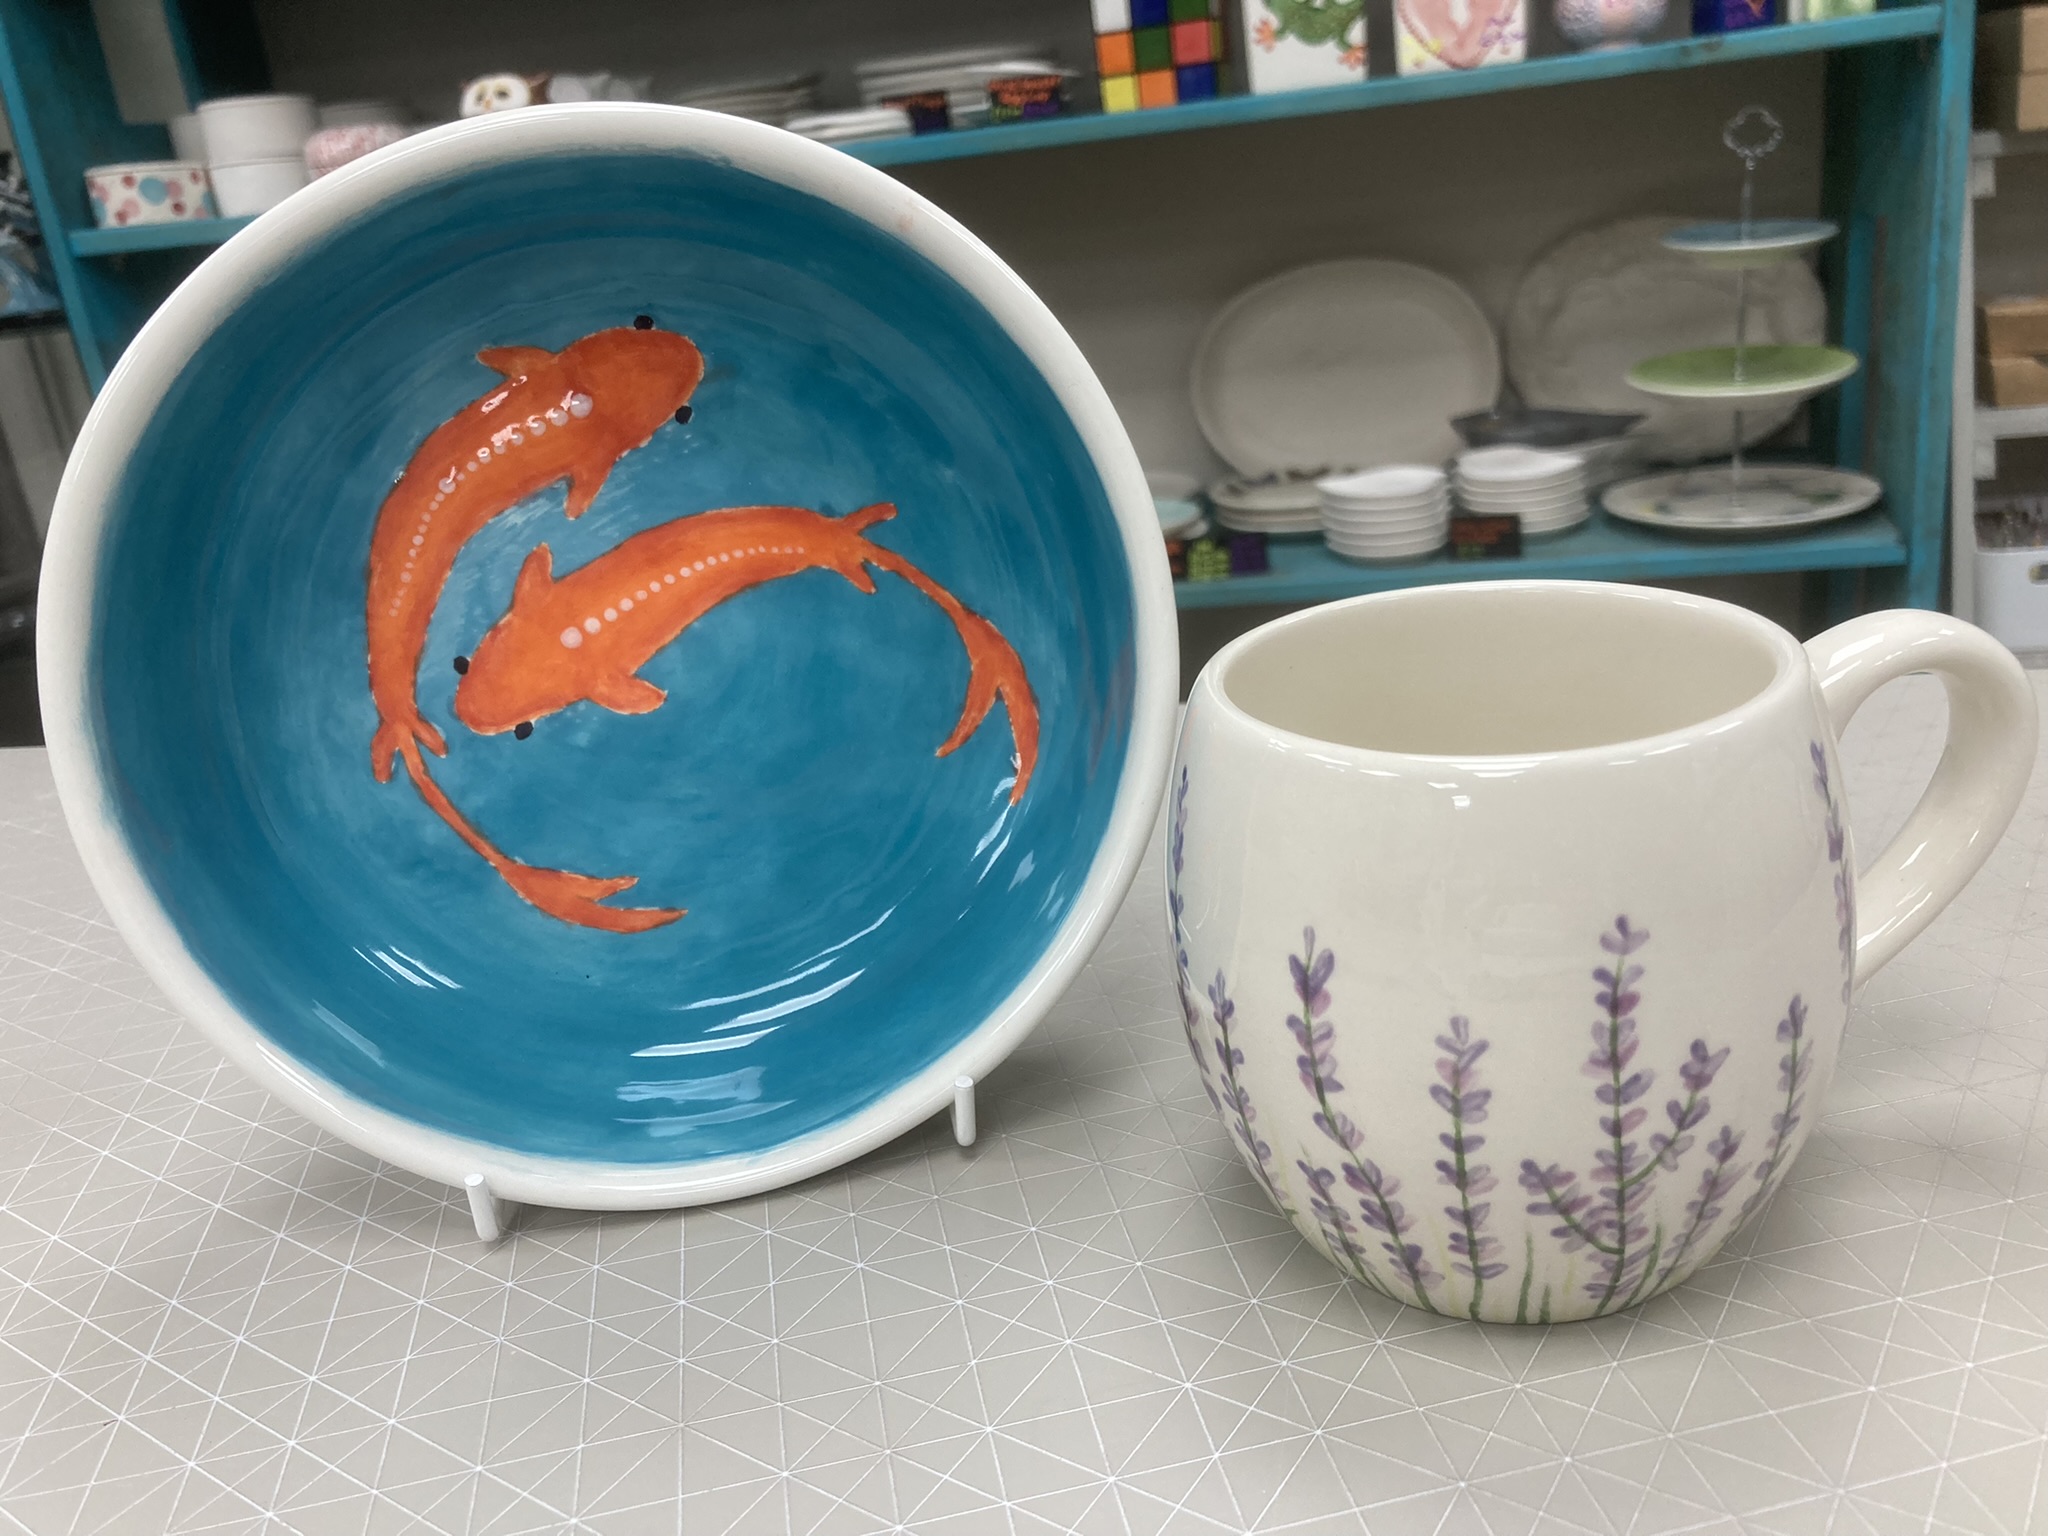 Little Mouse Pottery – Pottery painting at Little Mouse studio is